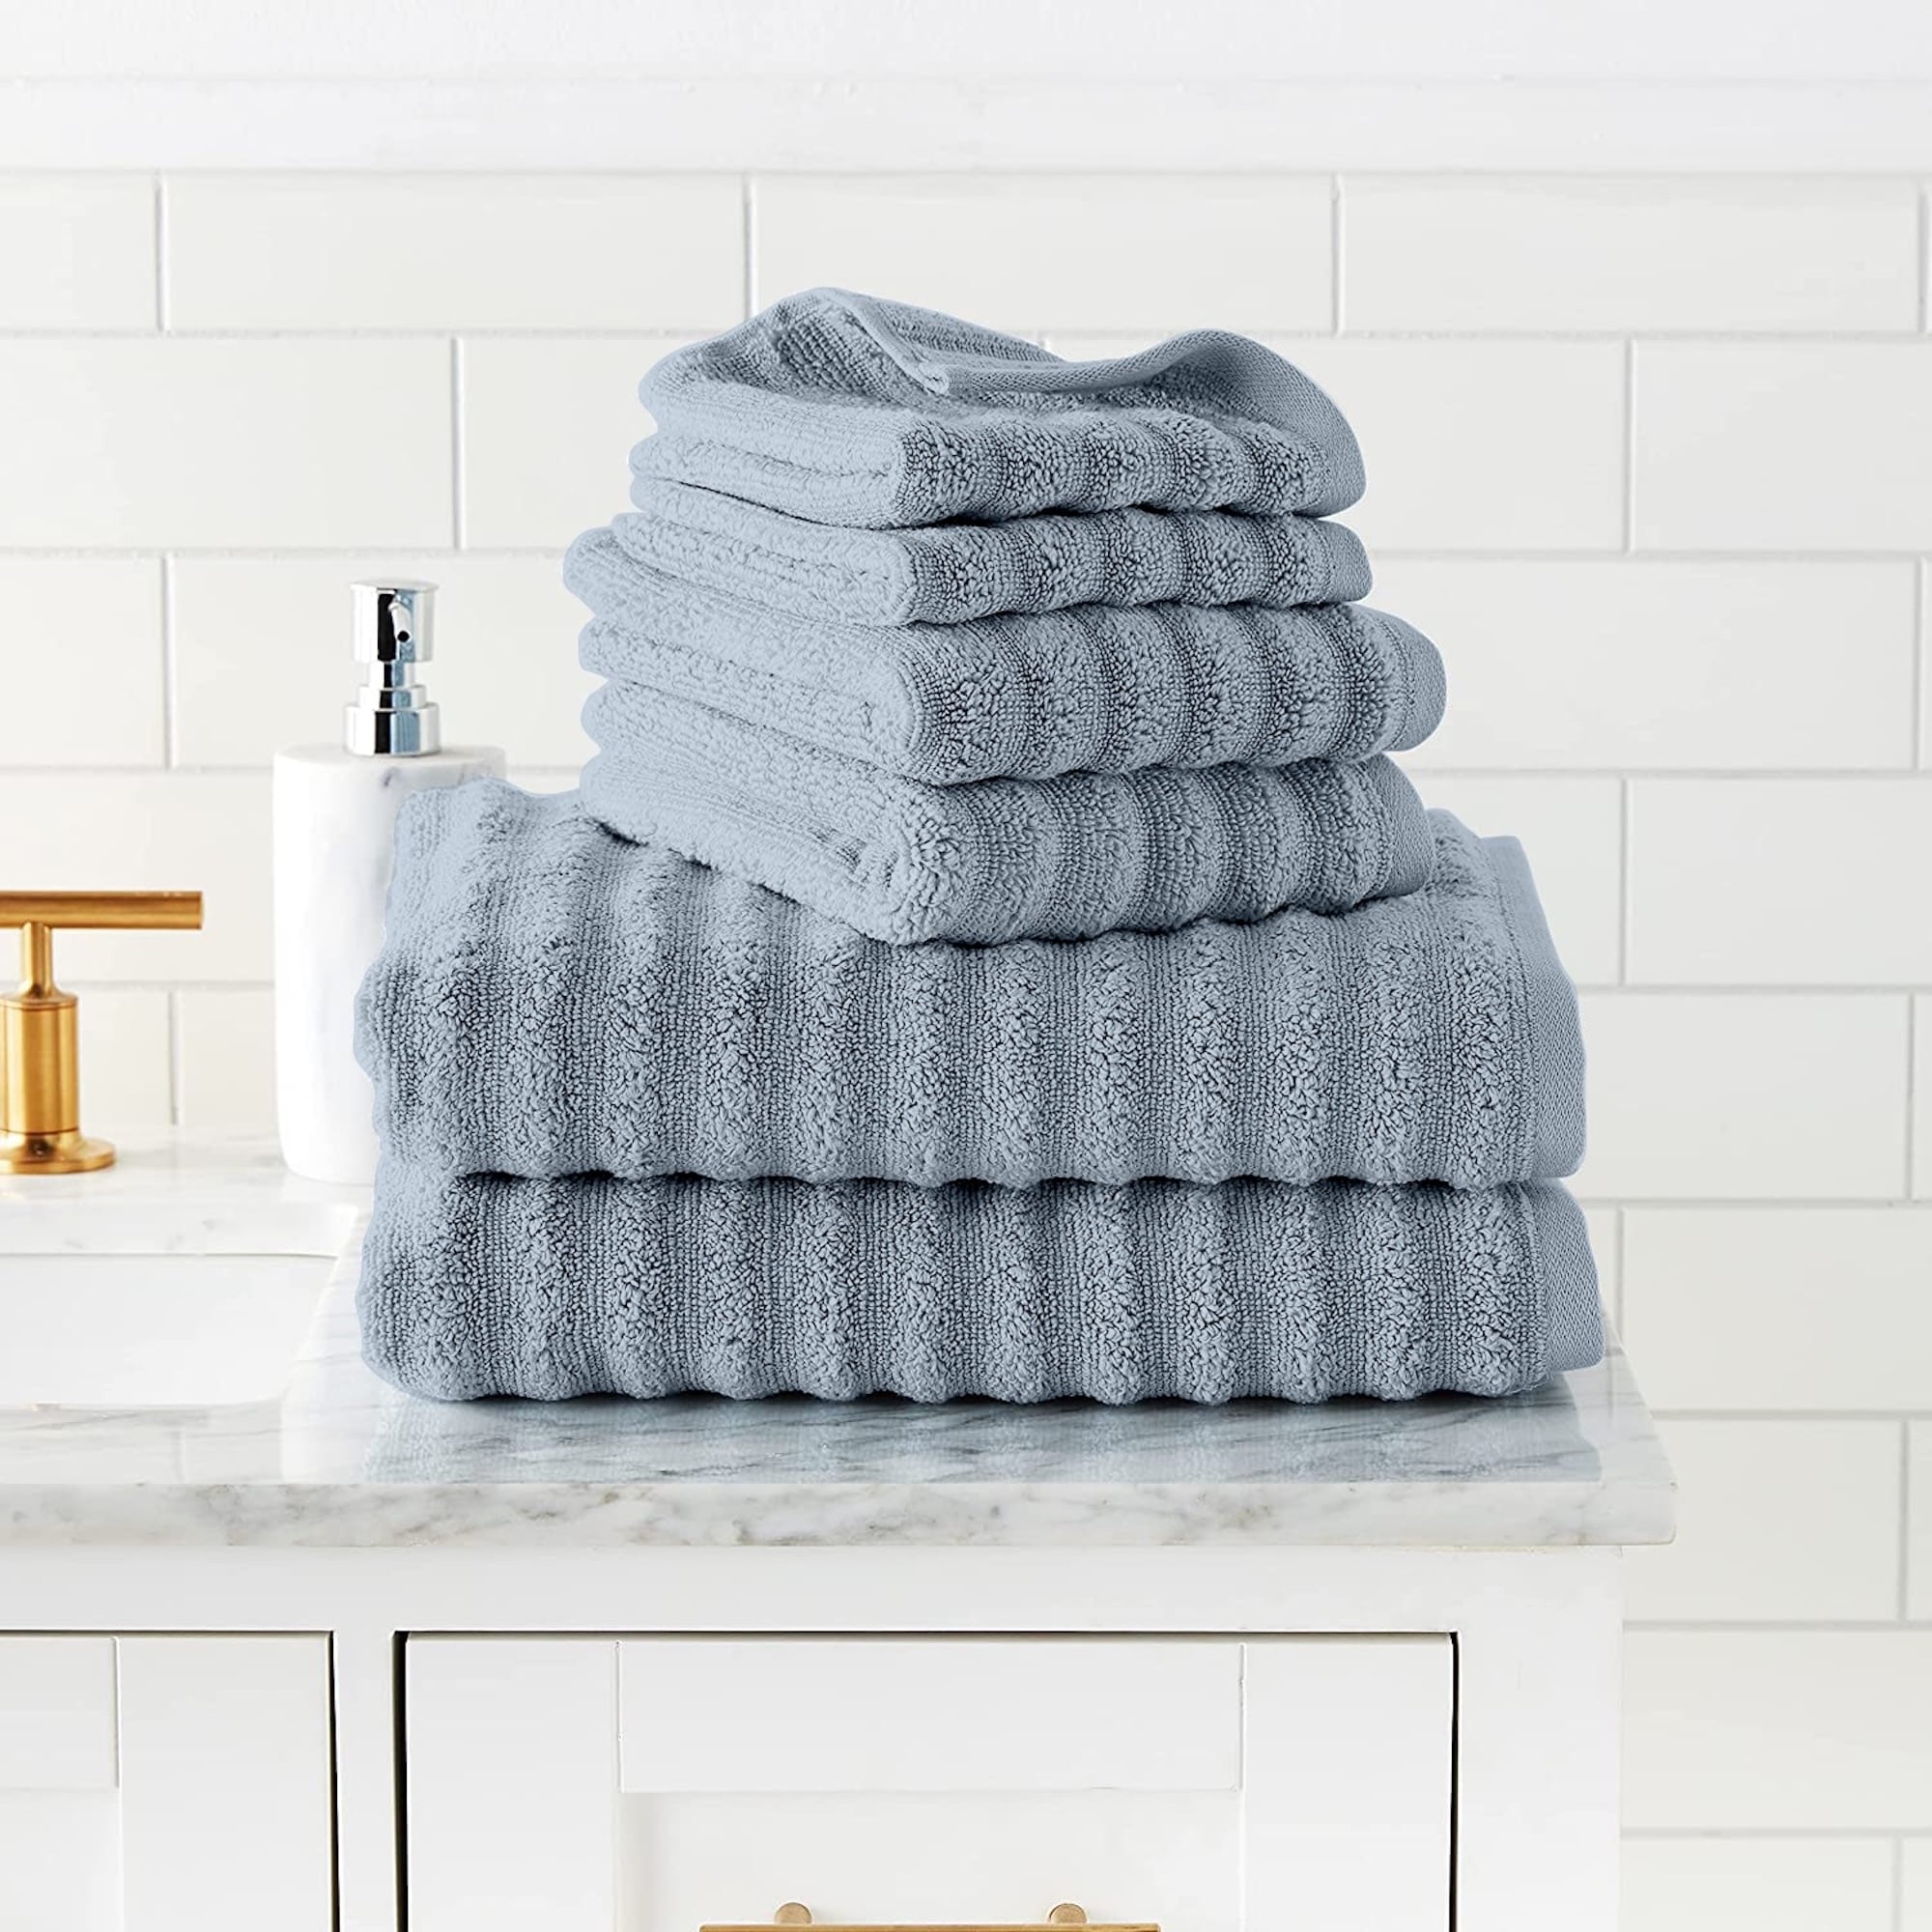 Dropship Super Soft Cotton Quick Dry Bath Towel 6 Piece Set to Sell Online  at a Lower Price